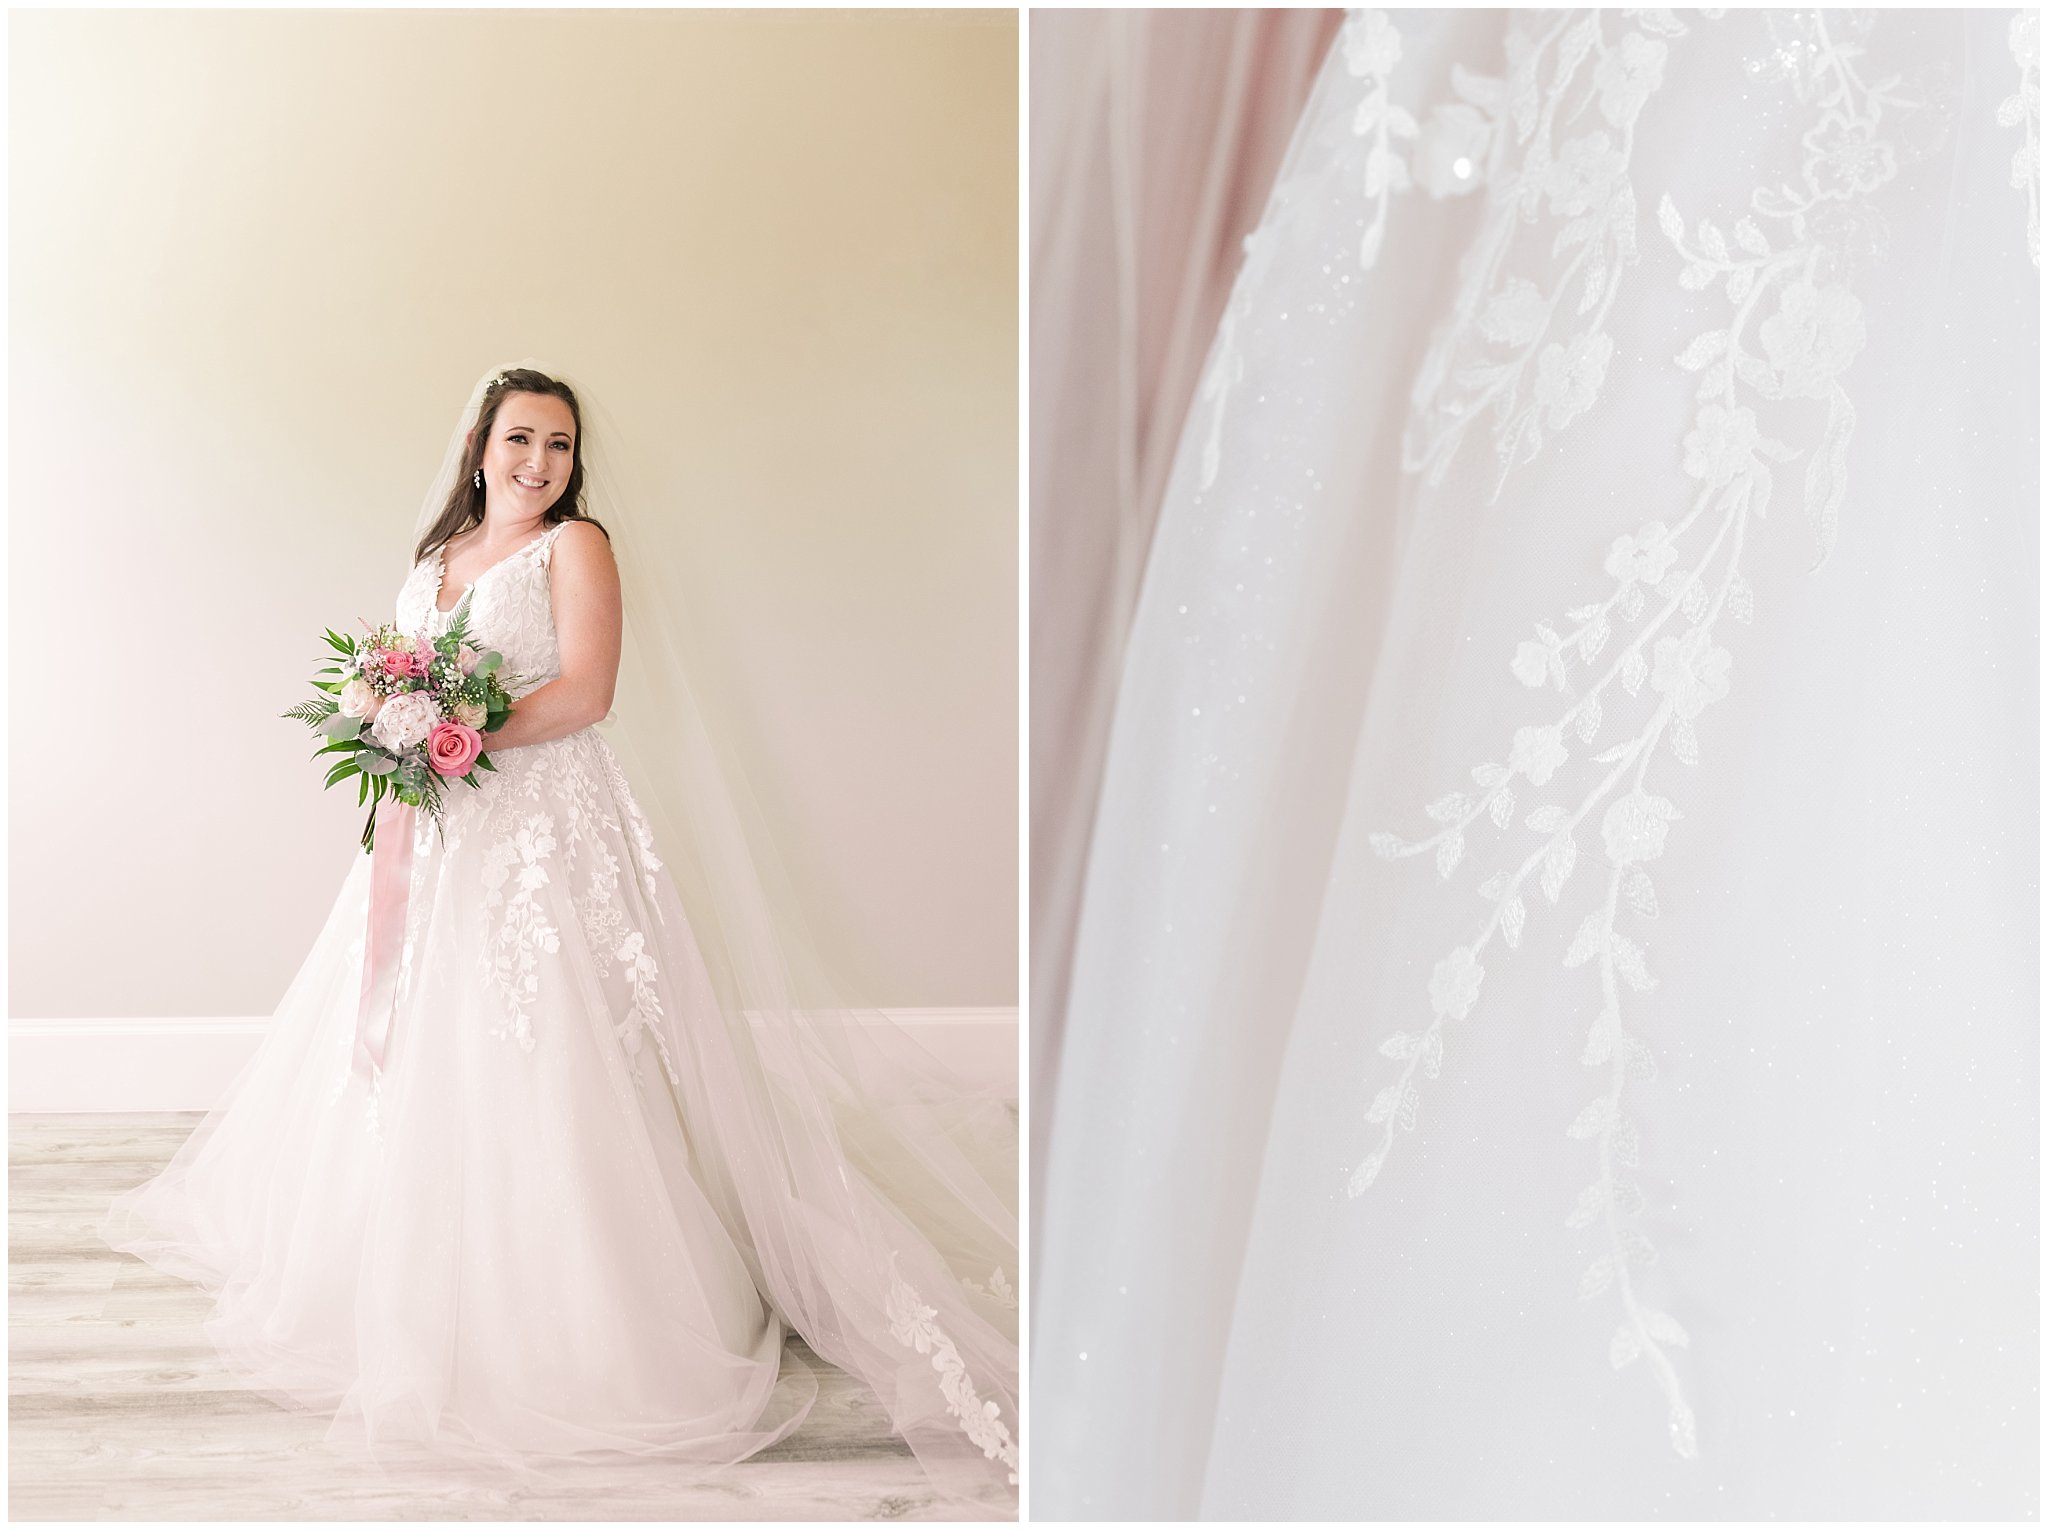 Bride in champagne wedding dress with pink, green, and white floral bouquet | Oak Hills Utah Dusty Rose and Gray Summer Wedding | Jessie and Dallin Photography